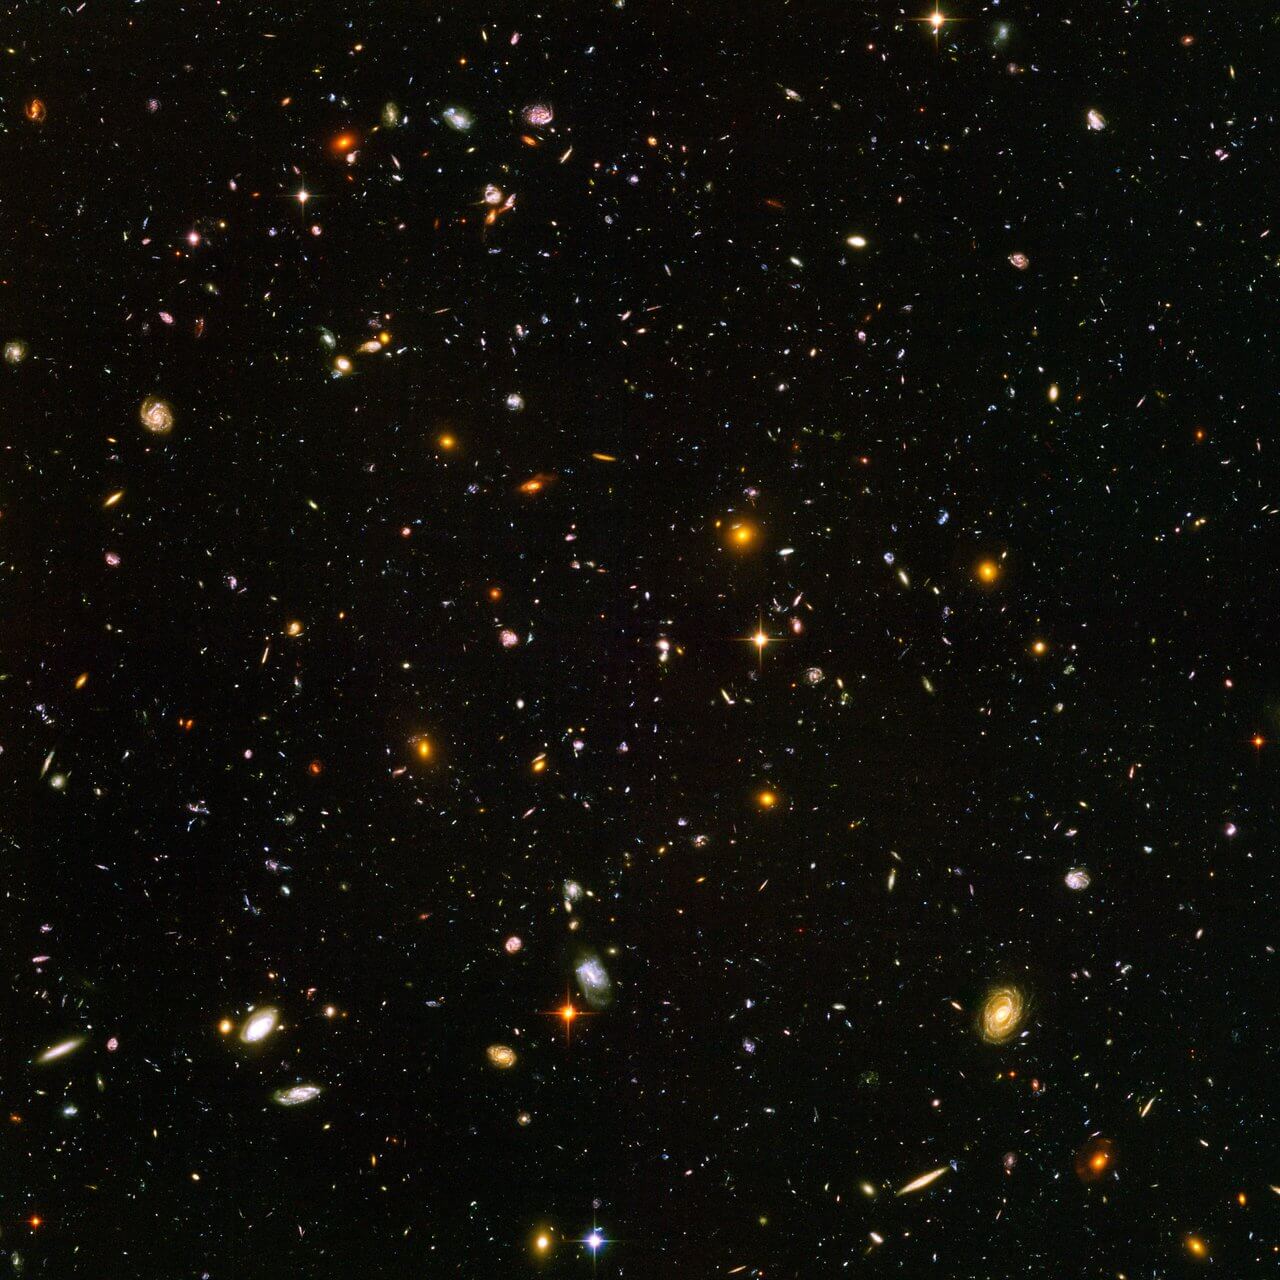 Crowded field of galaxies on black. Galaxies appear white, gold, and pale blue. They range in size and brightness, some with distinguishable spiral features or halos, others tiny pinpricks in the distance.